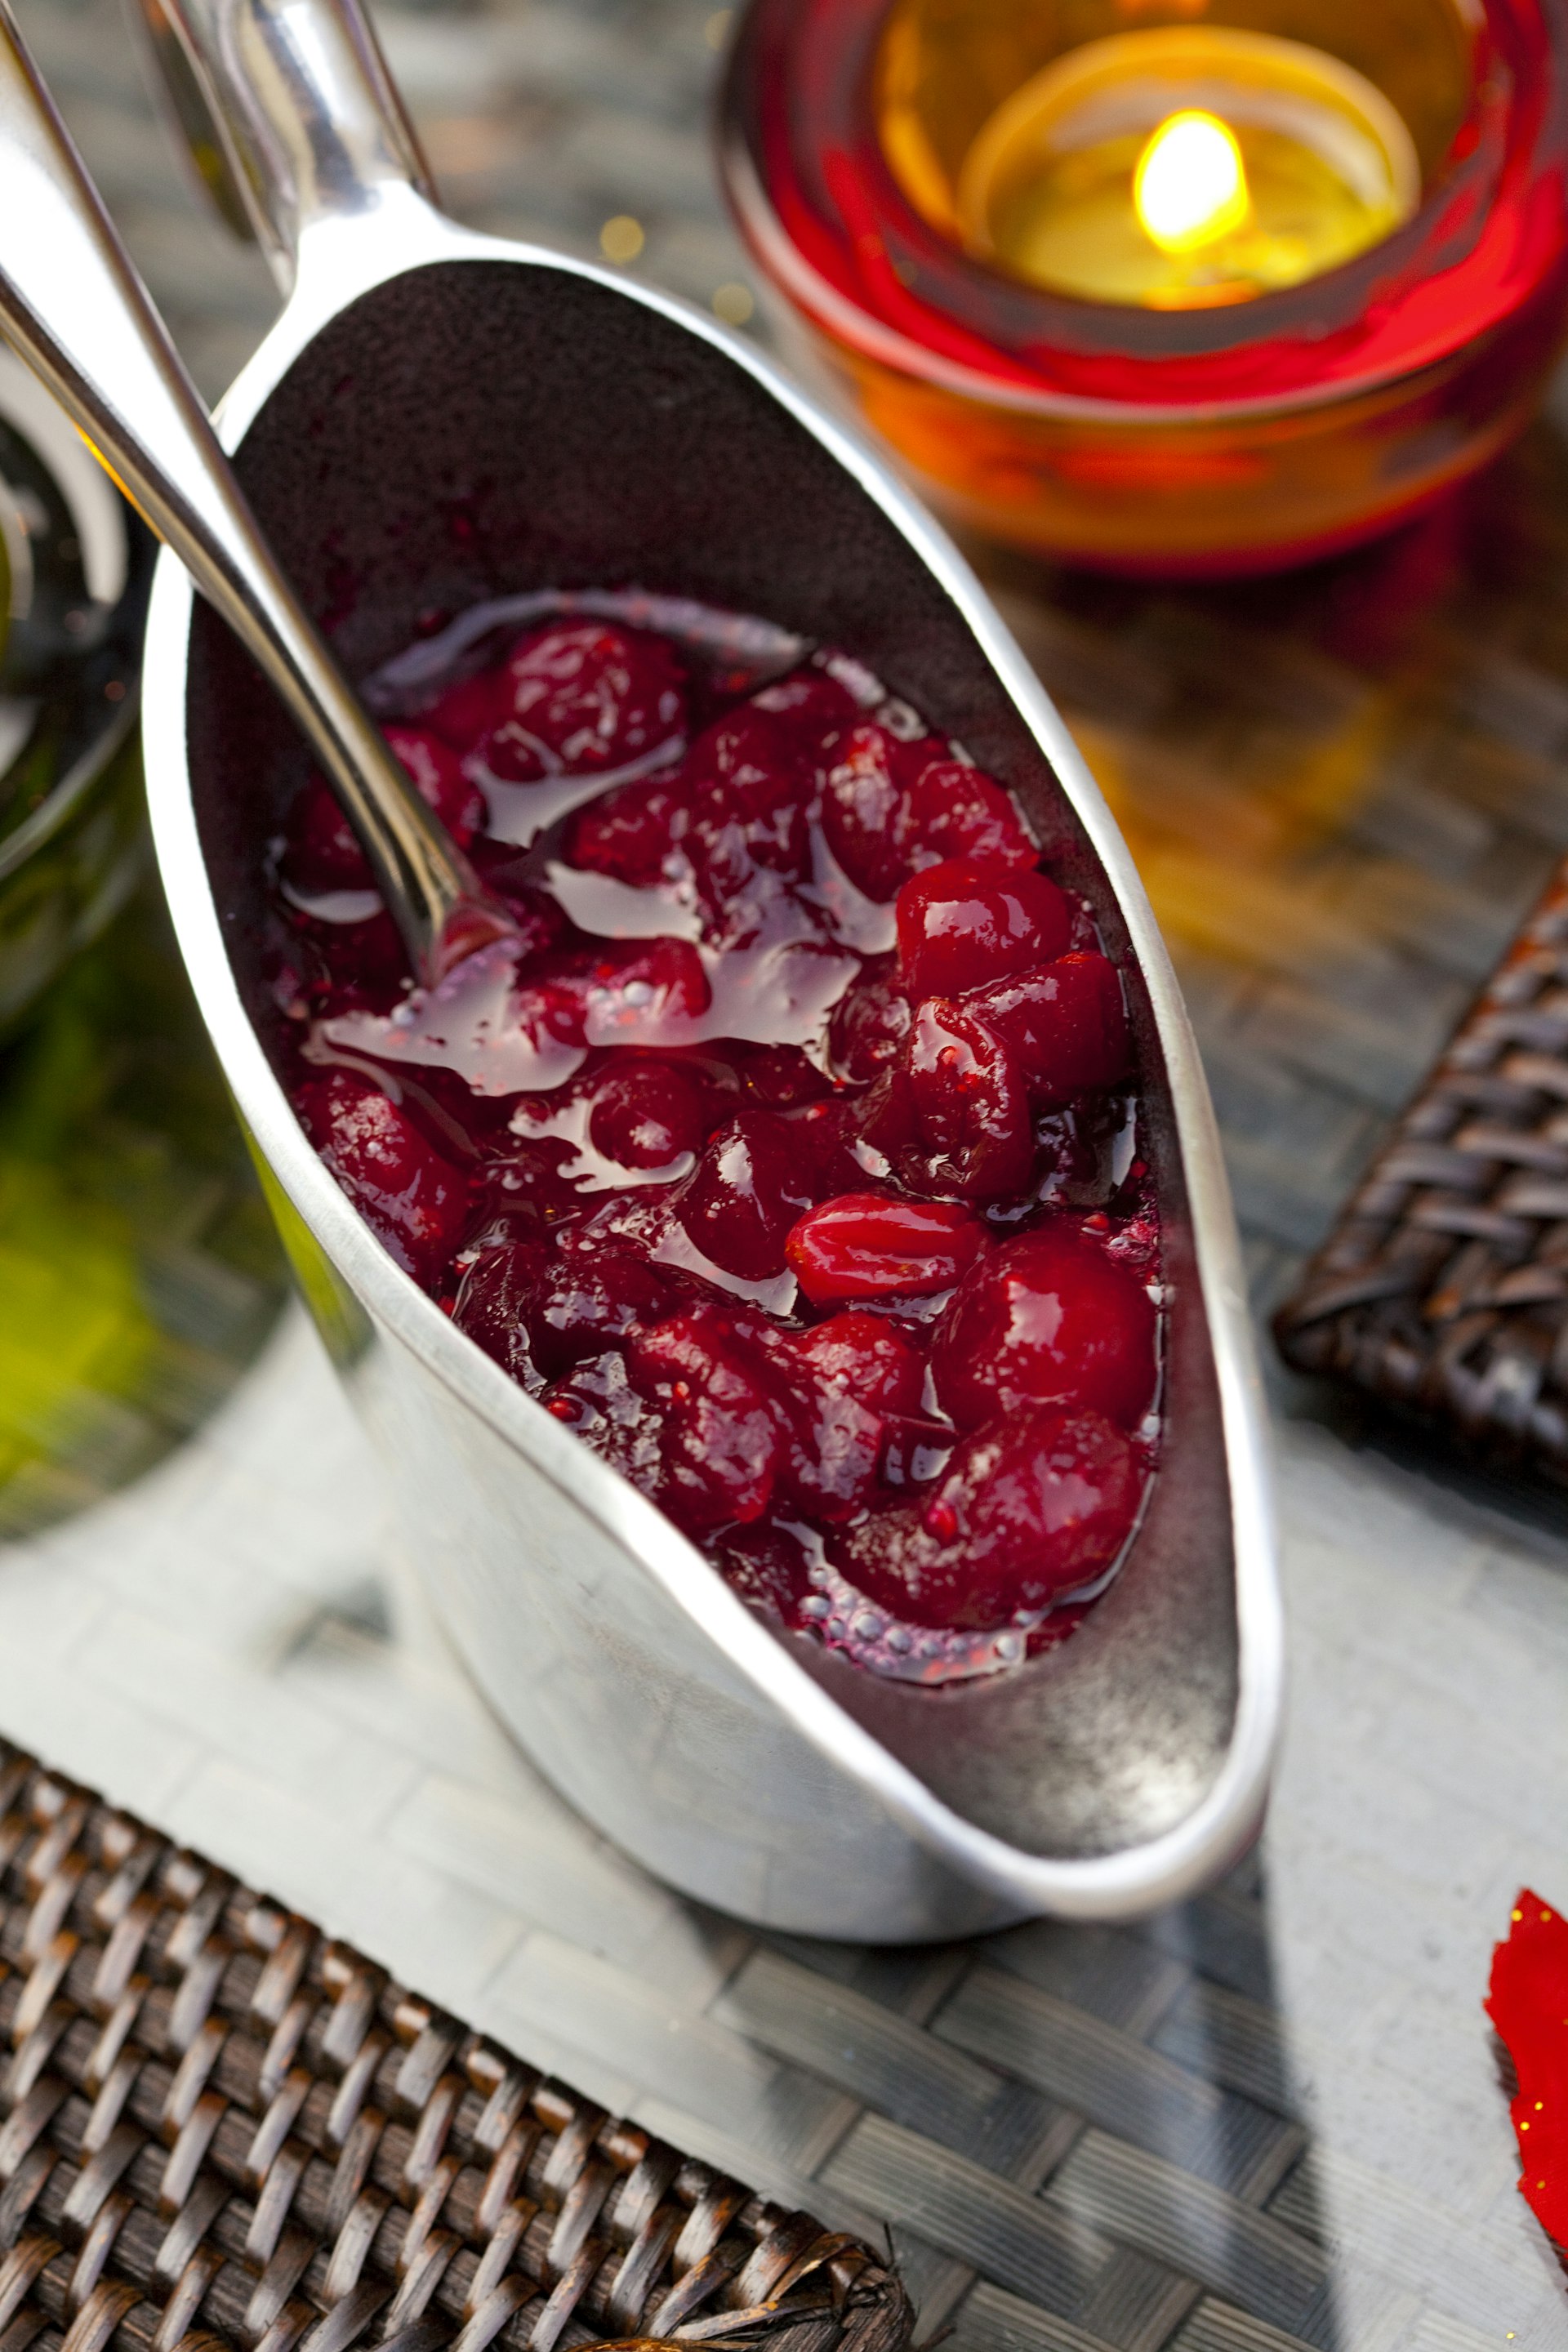 Cranberry sauce in pitcher on table